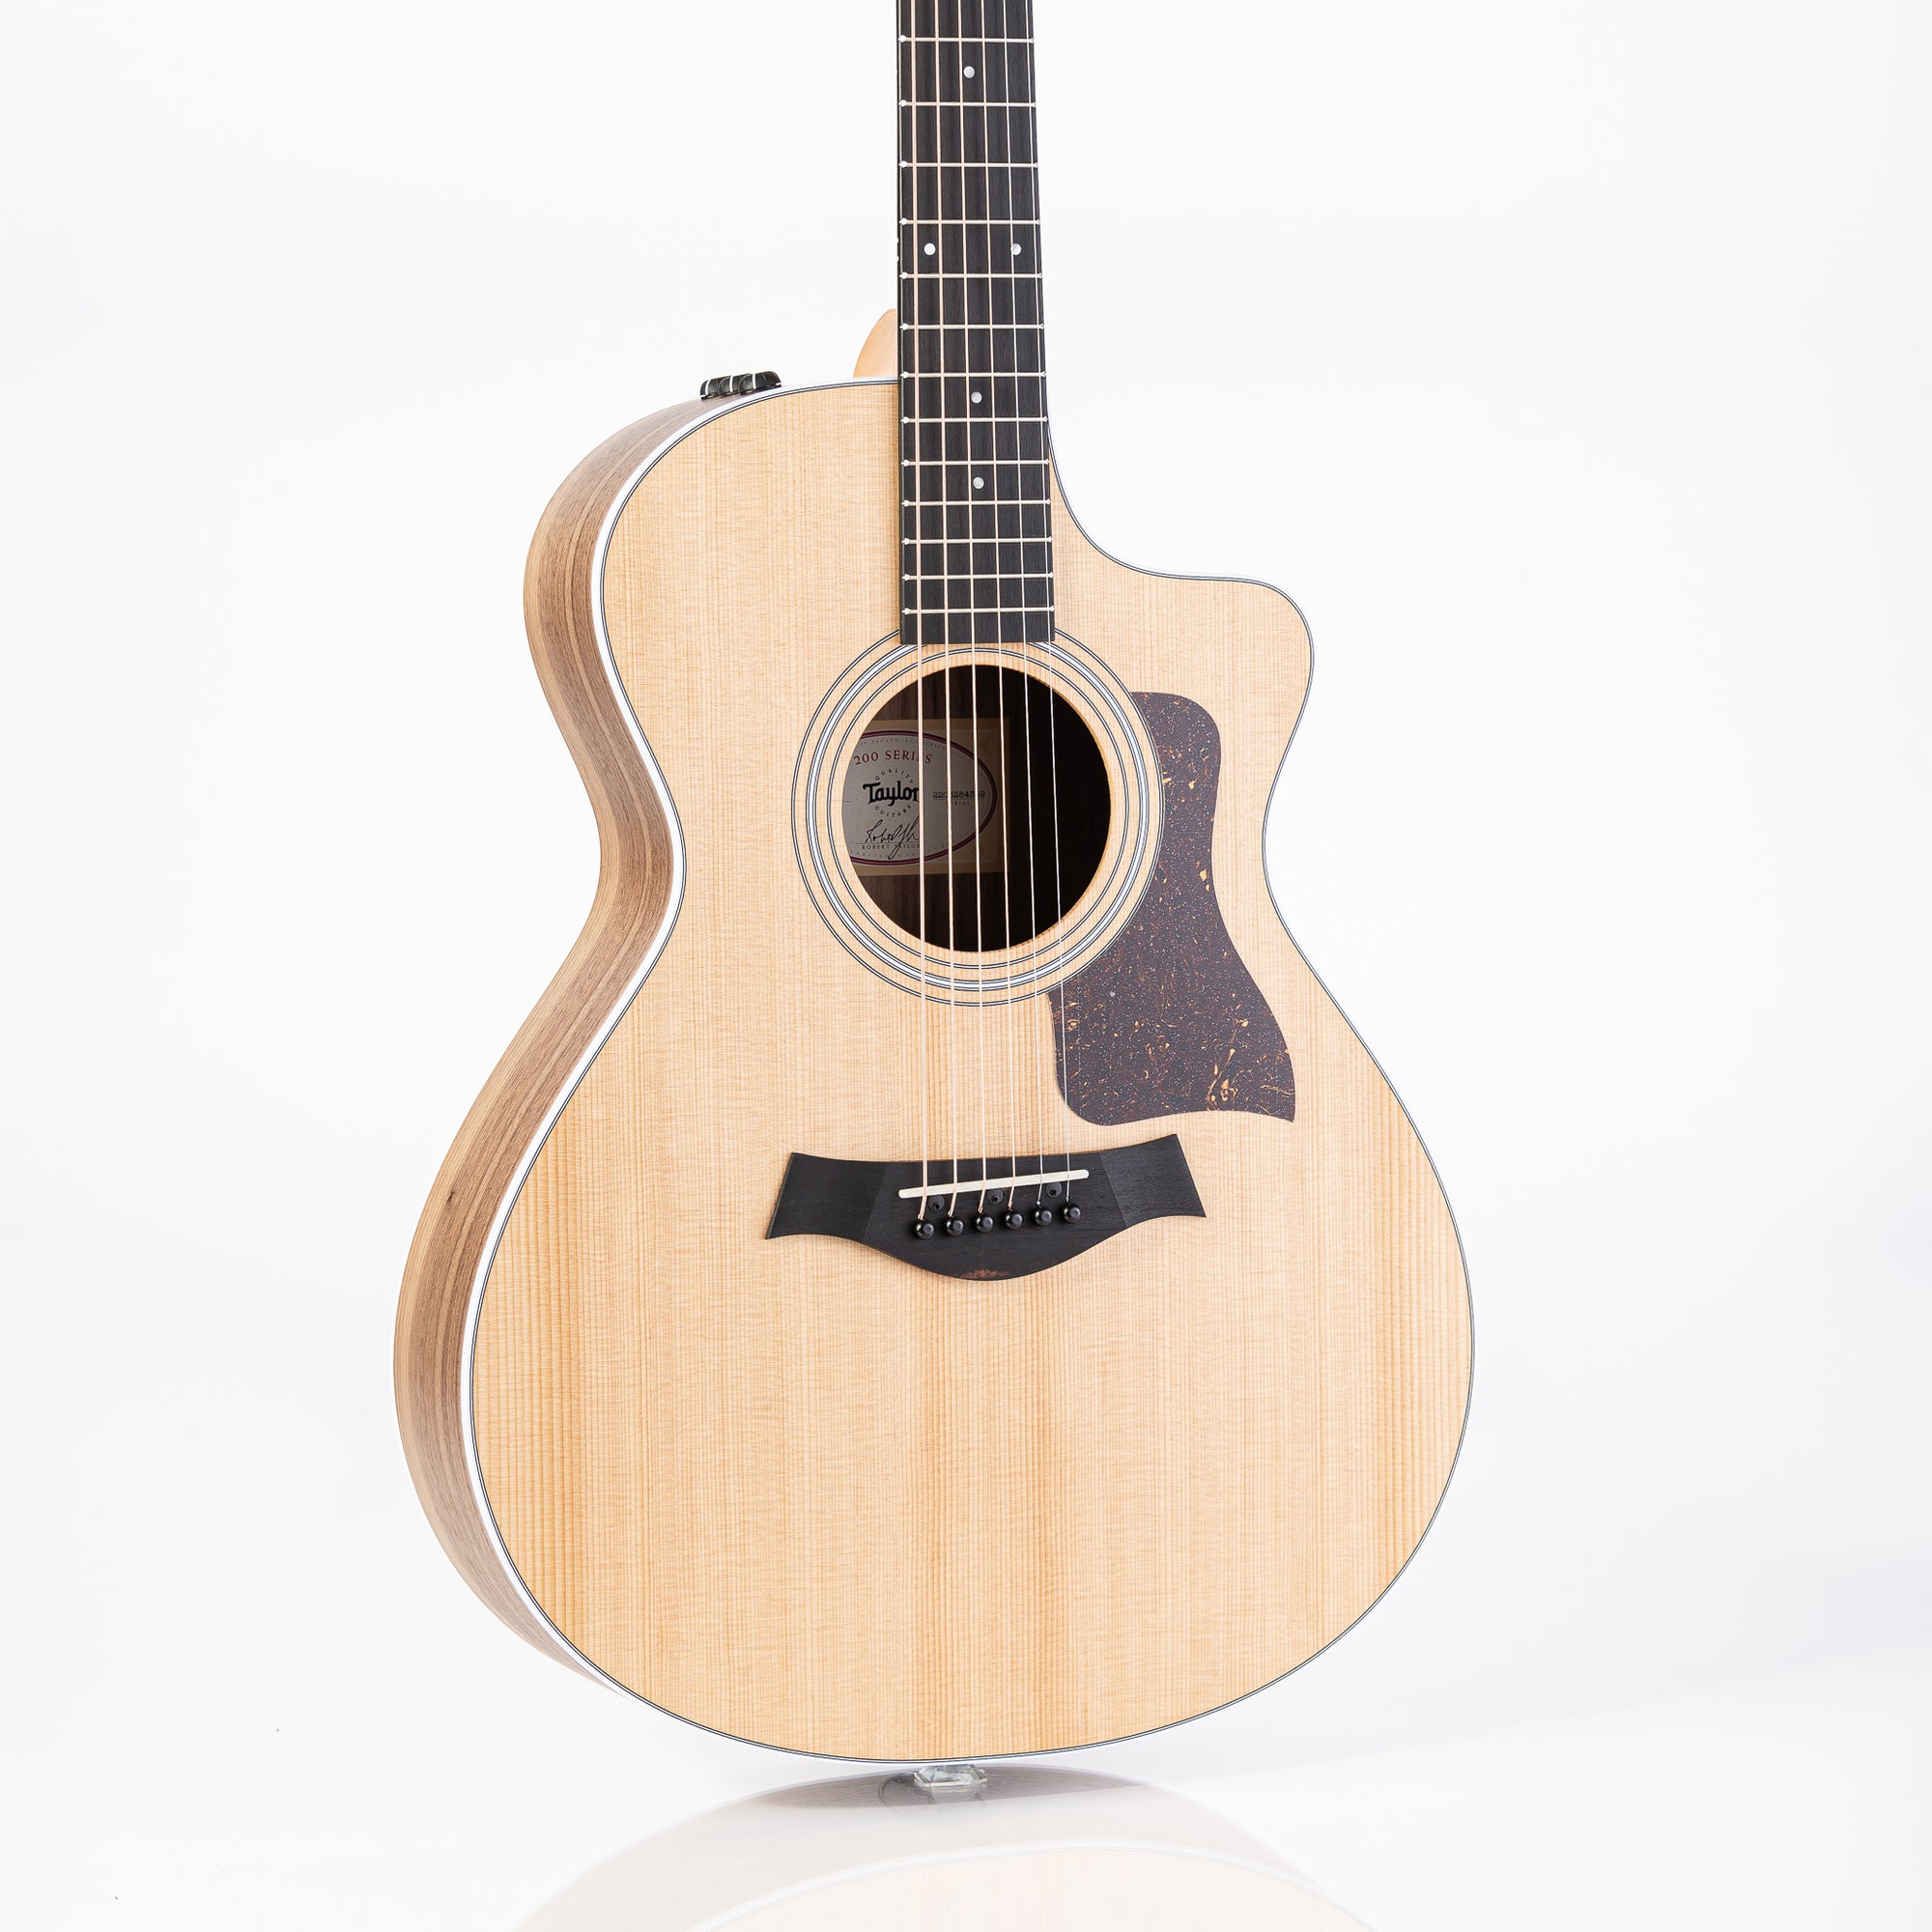 Taylor 212ce Walnut/Spruce Acoustic Electric Guitar - Natural